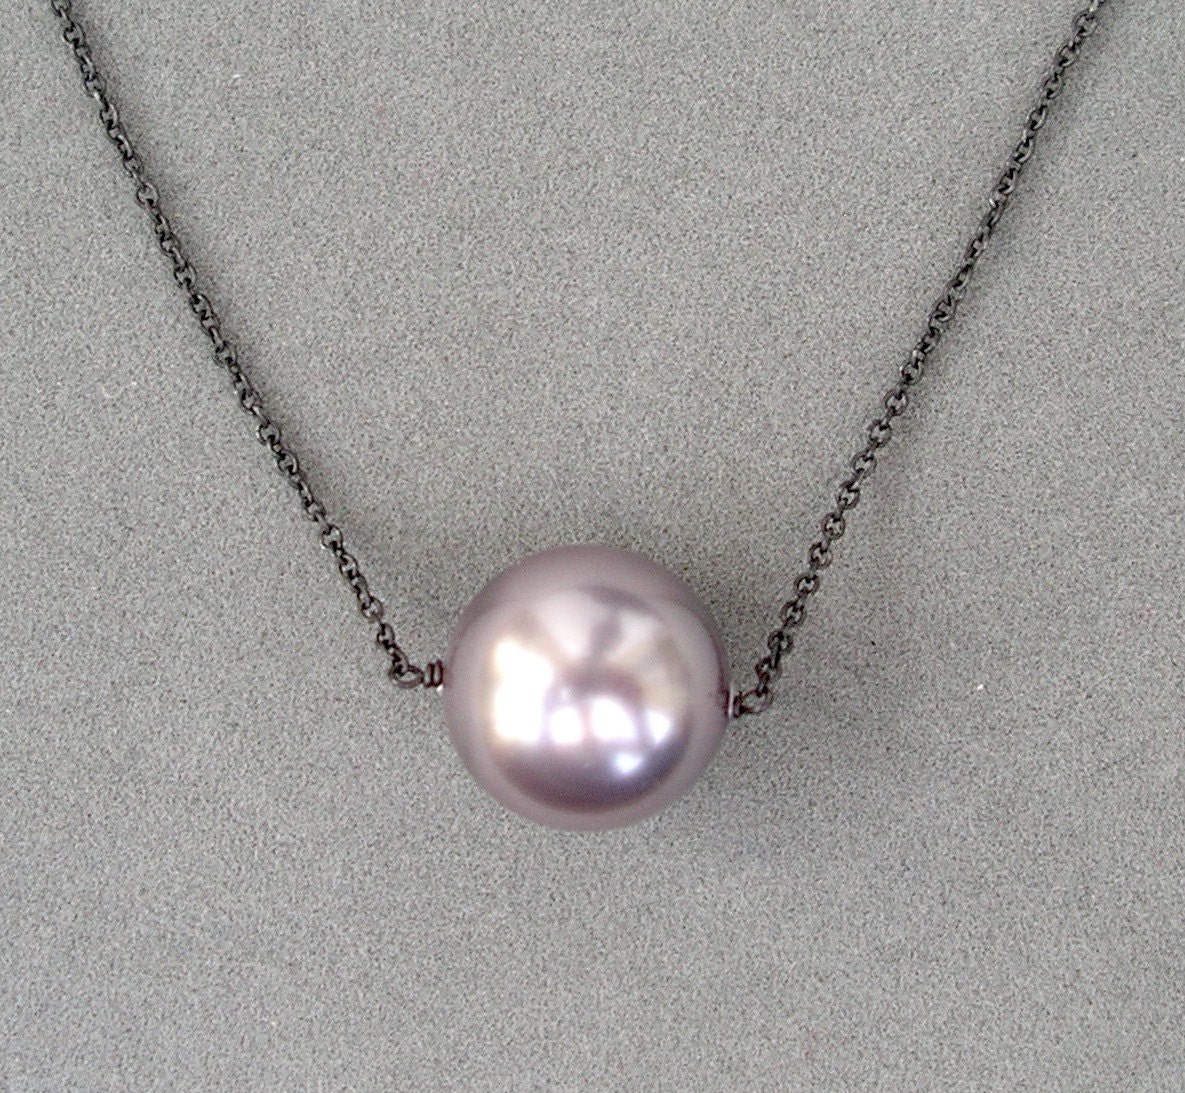 Indie pendant mauve pearl - MADE TO ORDER.